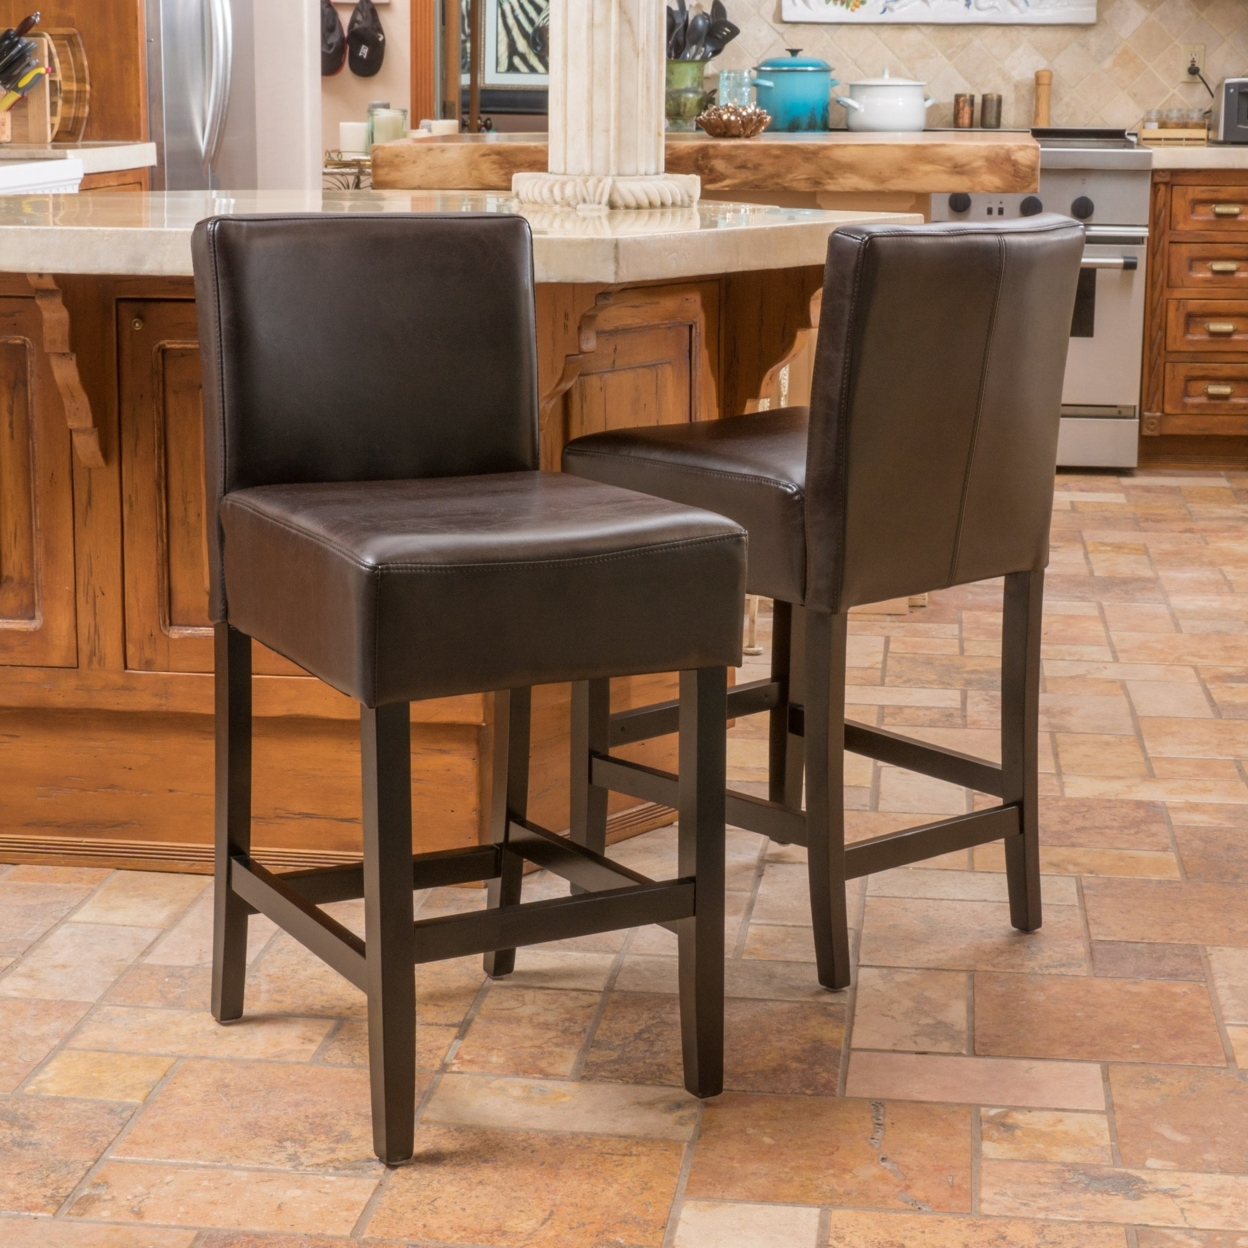 Seigel 19-Inch Brown Bonded Leather Counter Stool (Set Of 2)